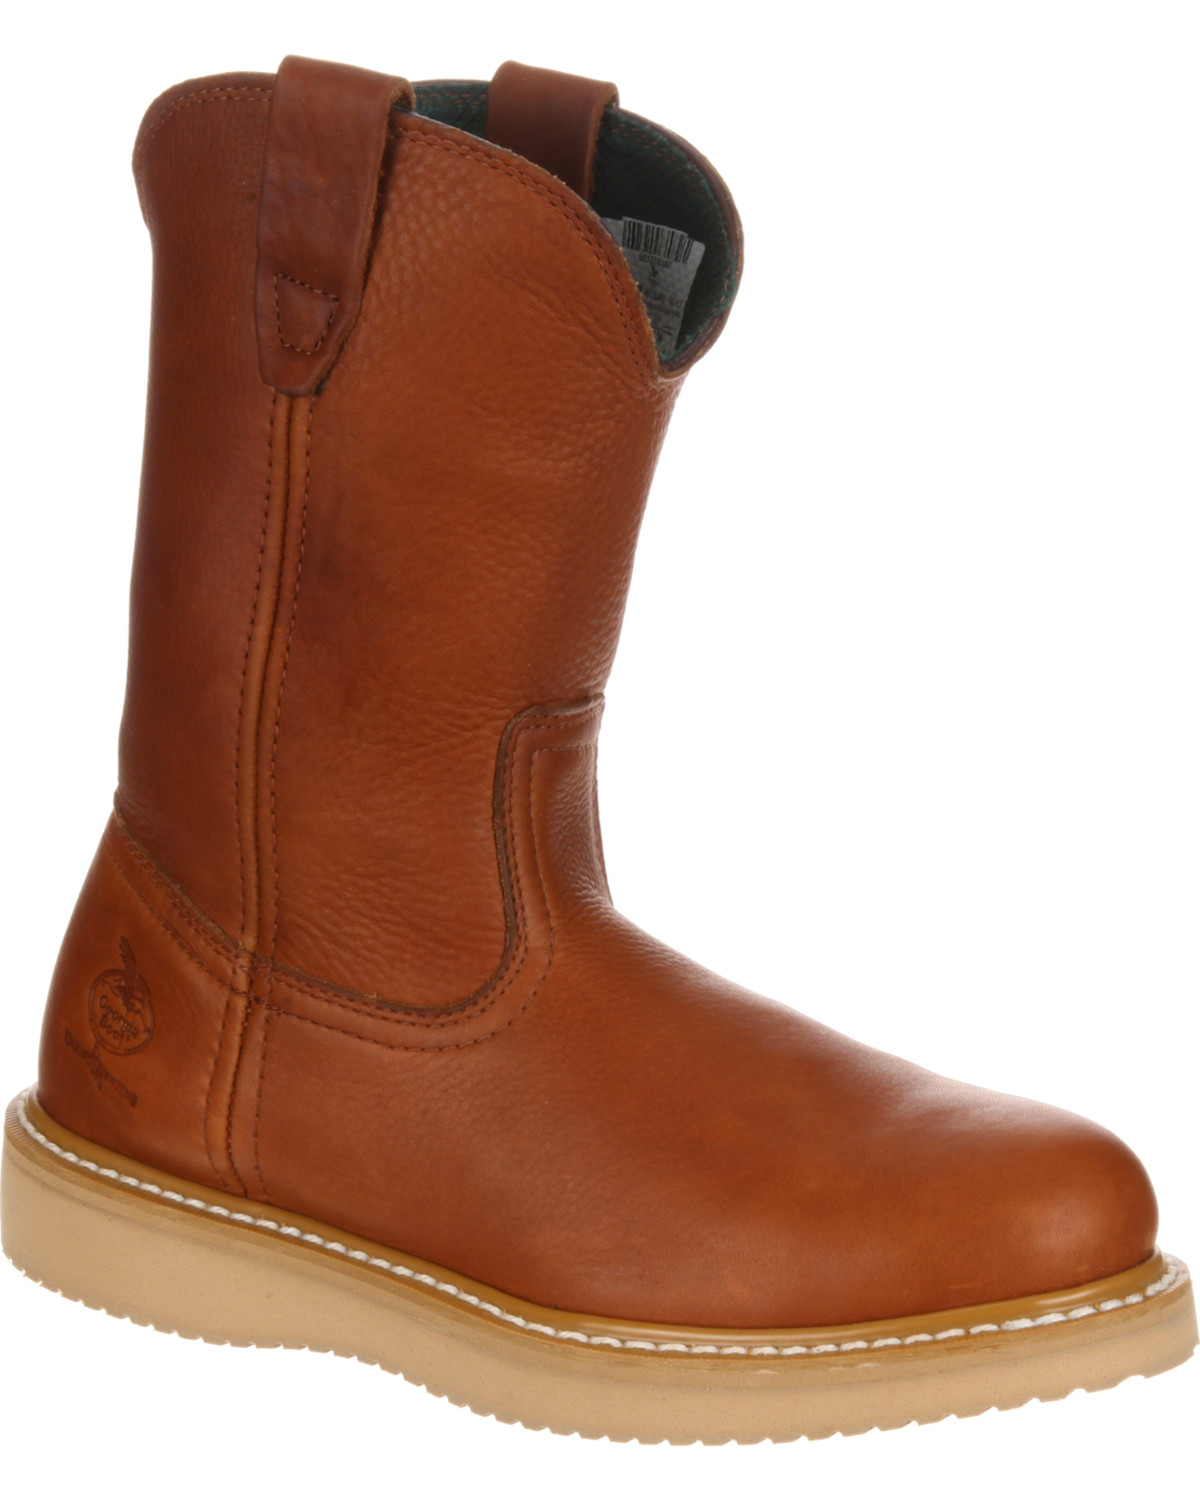 agriculture shoes online